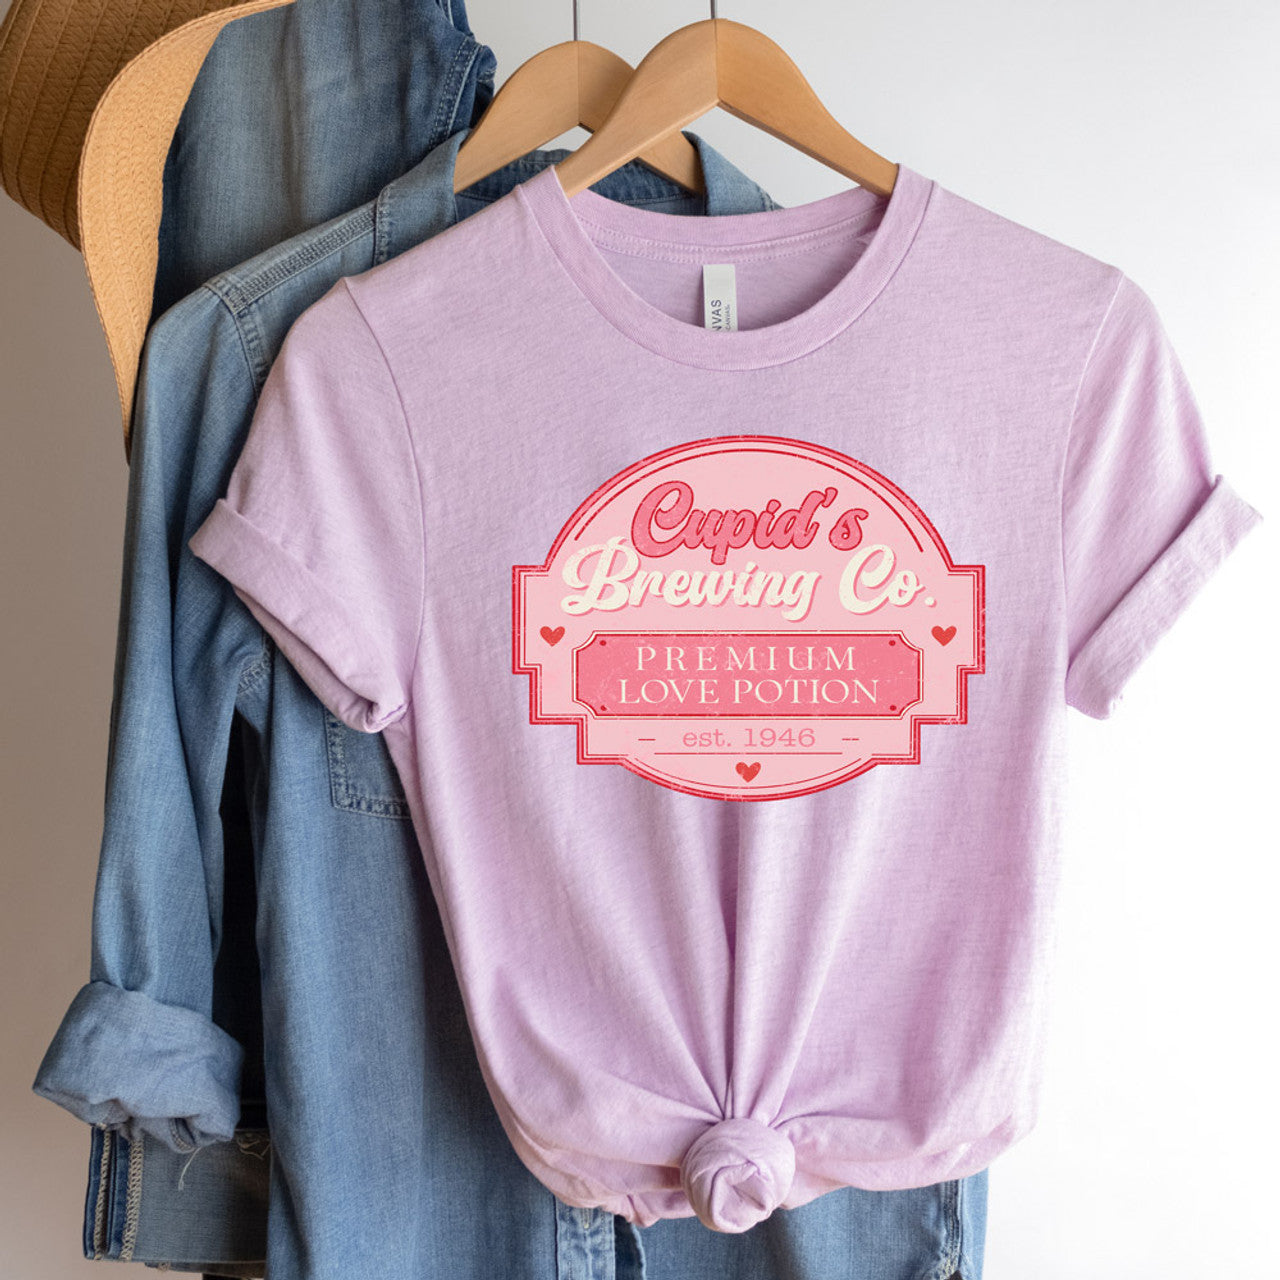 Cupid's Brewing Co. Premium Love Potion Tee